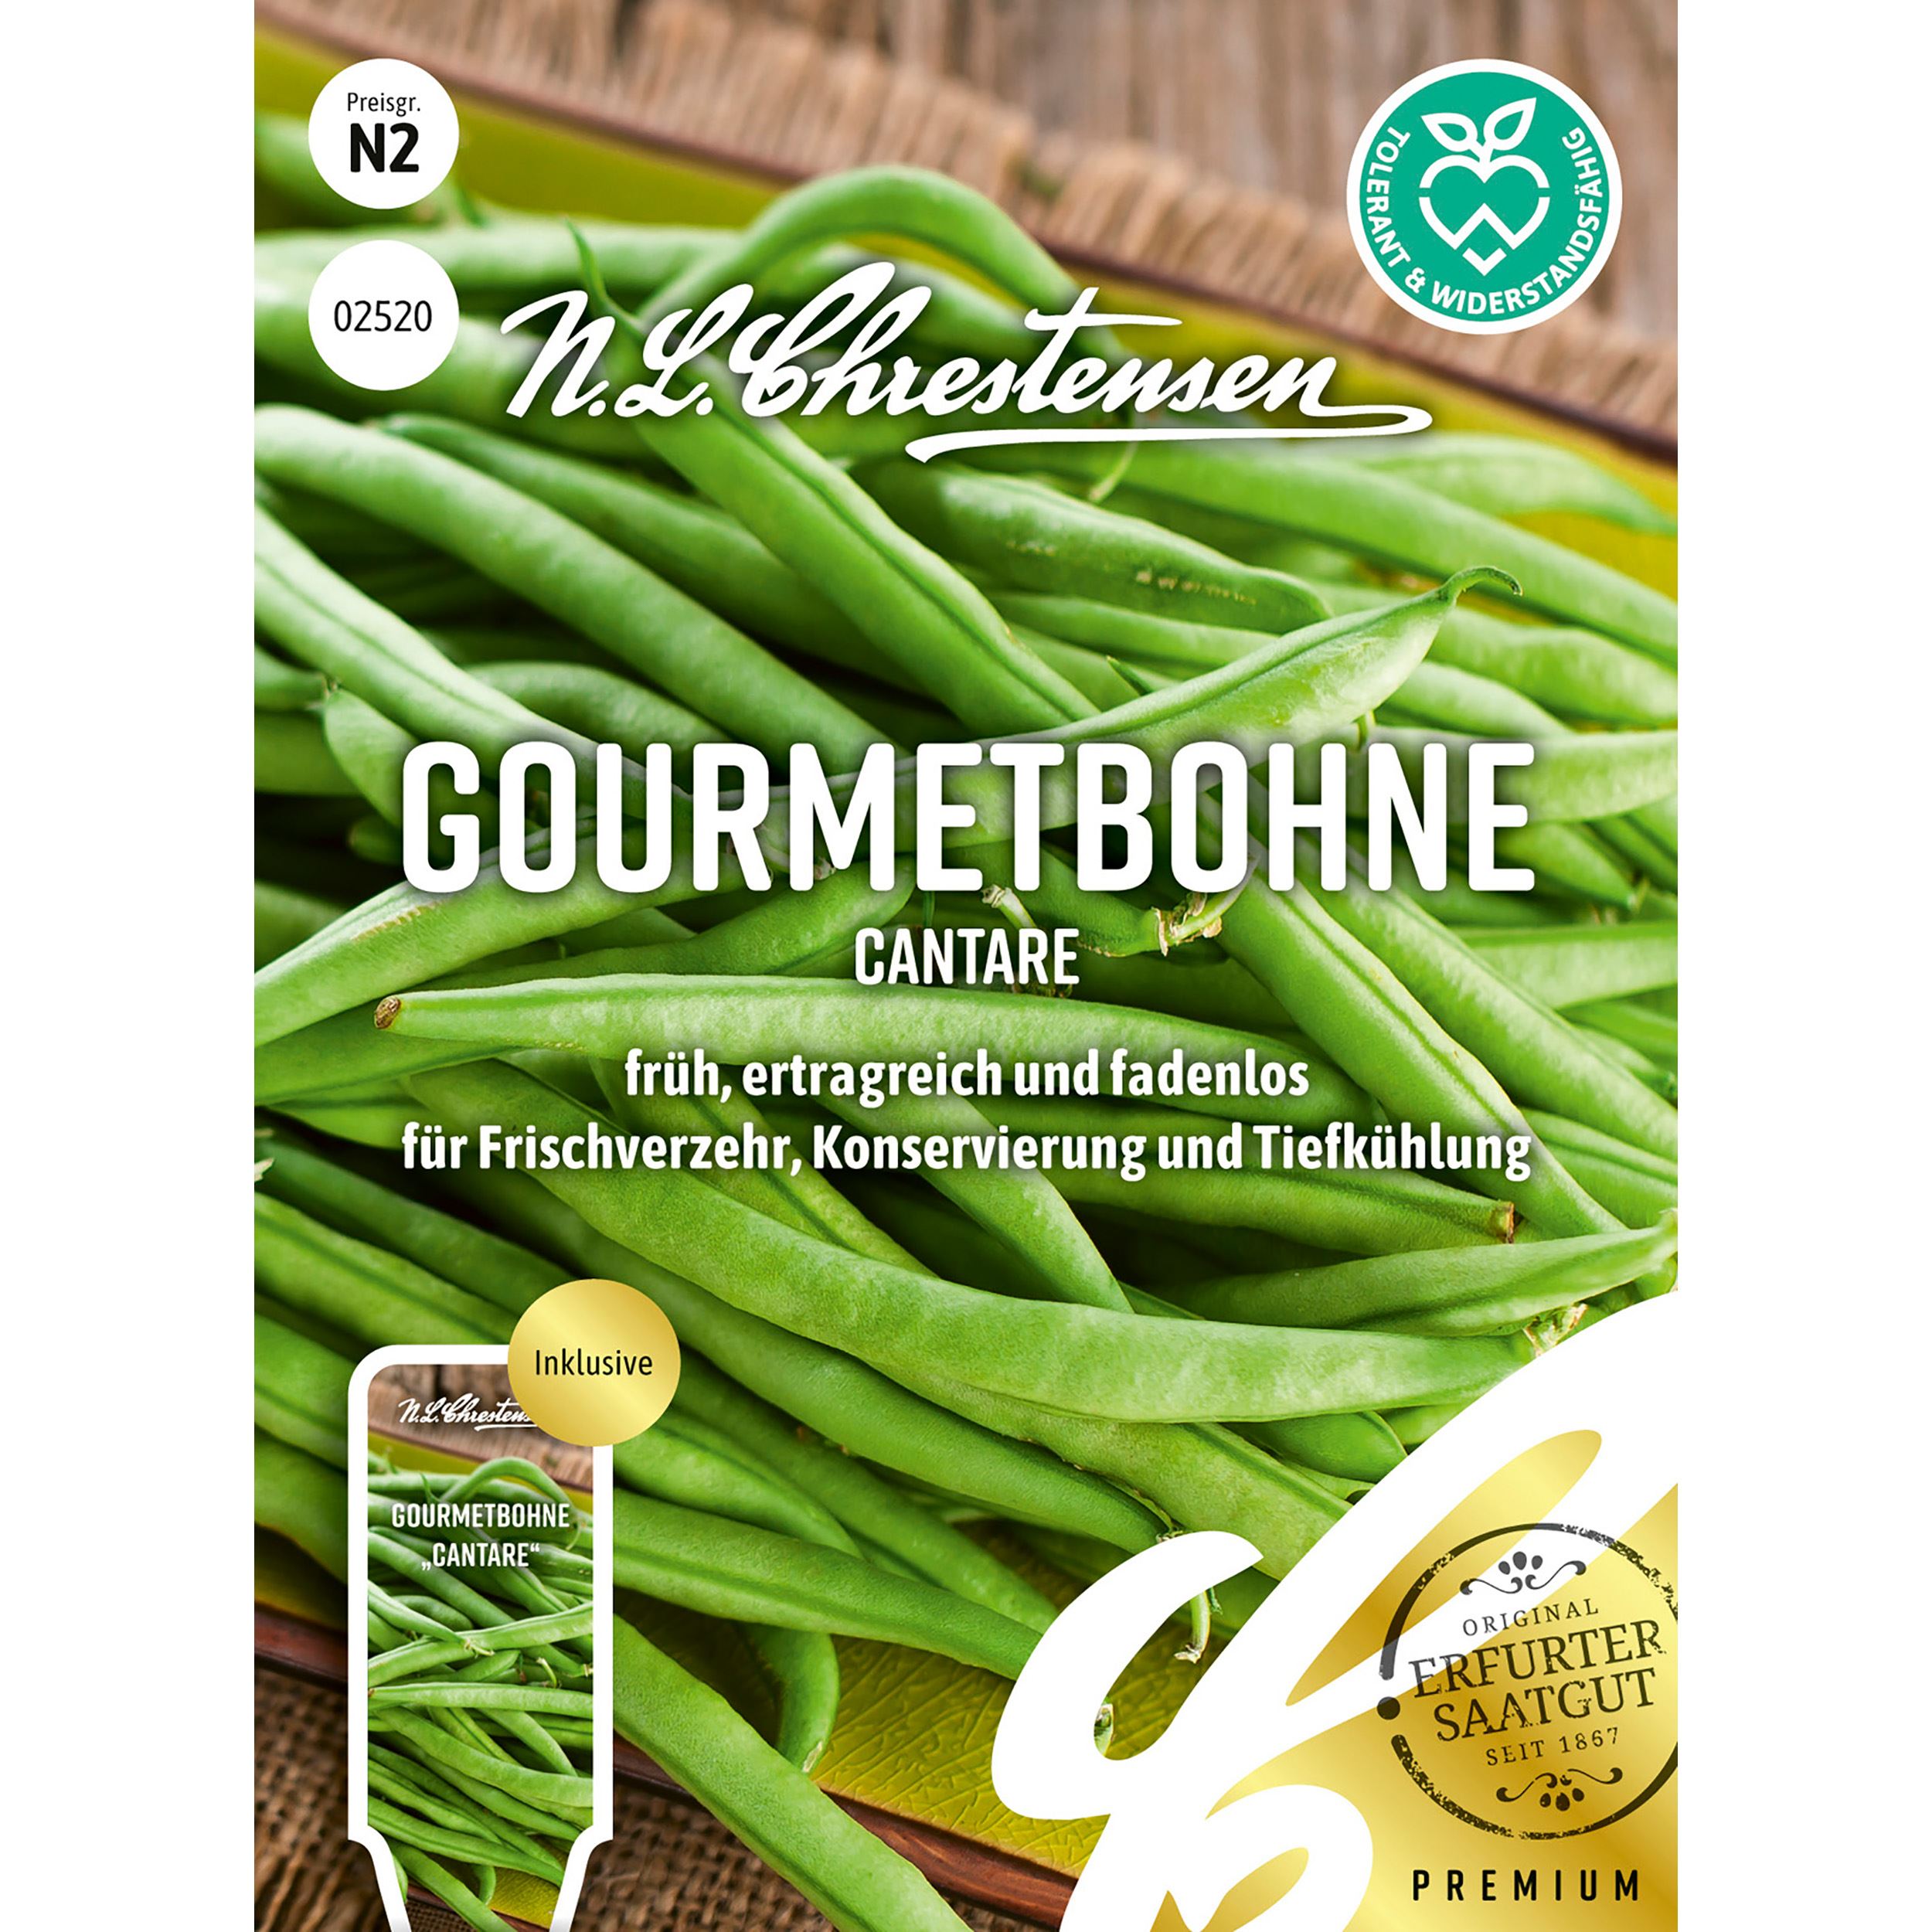 Gourmetbohne Cantare